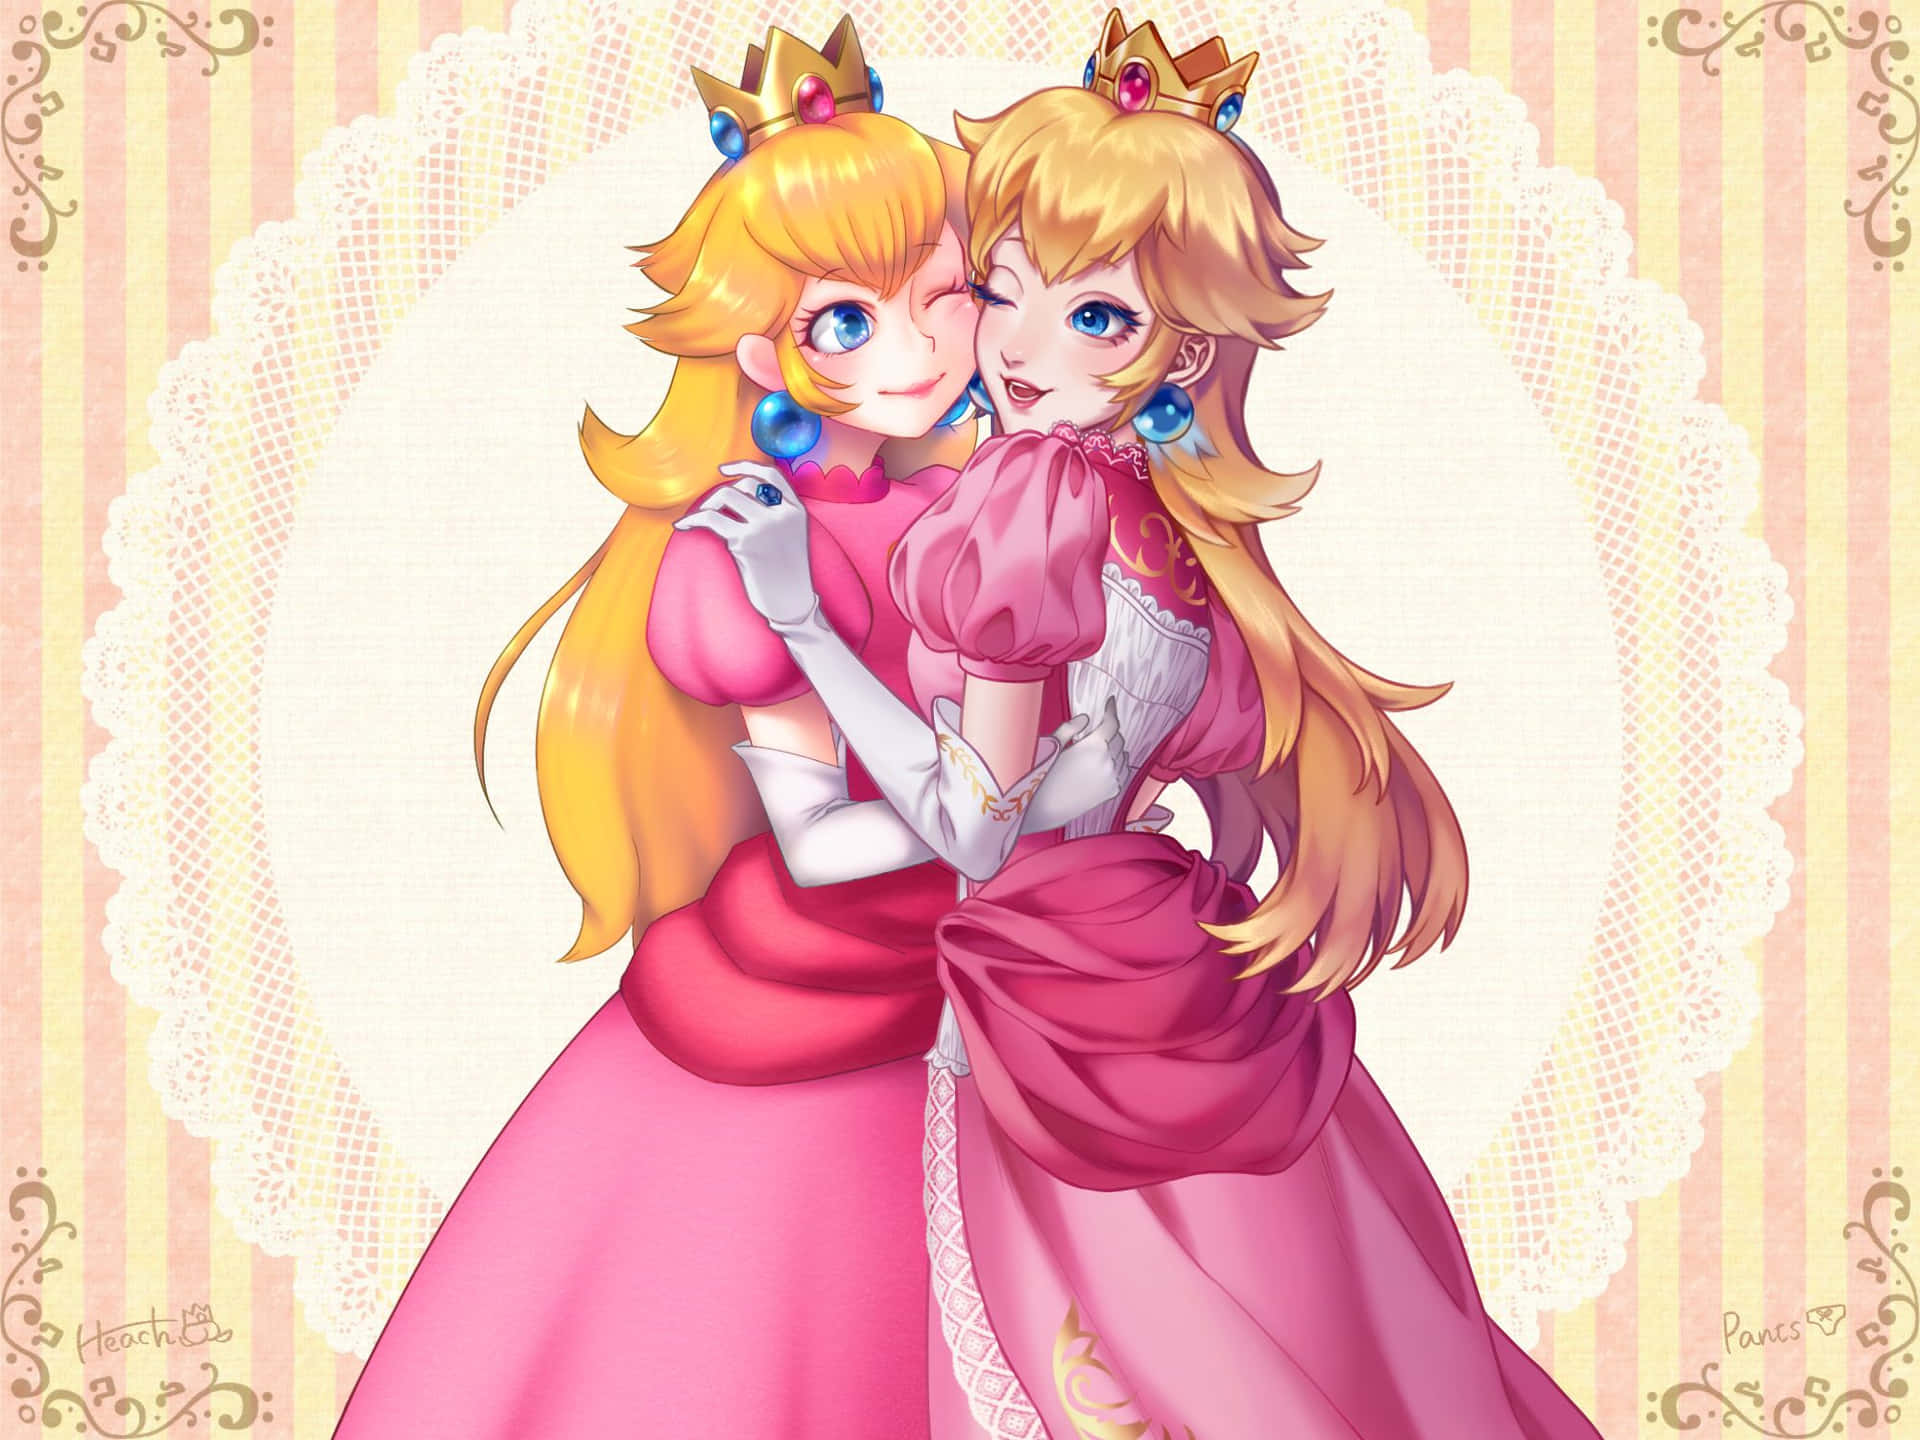 Princess Peach looks divine in her iconic gown. Wallpaper